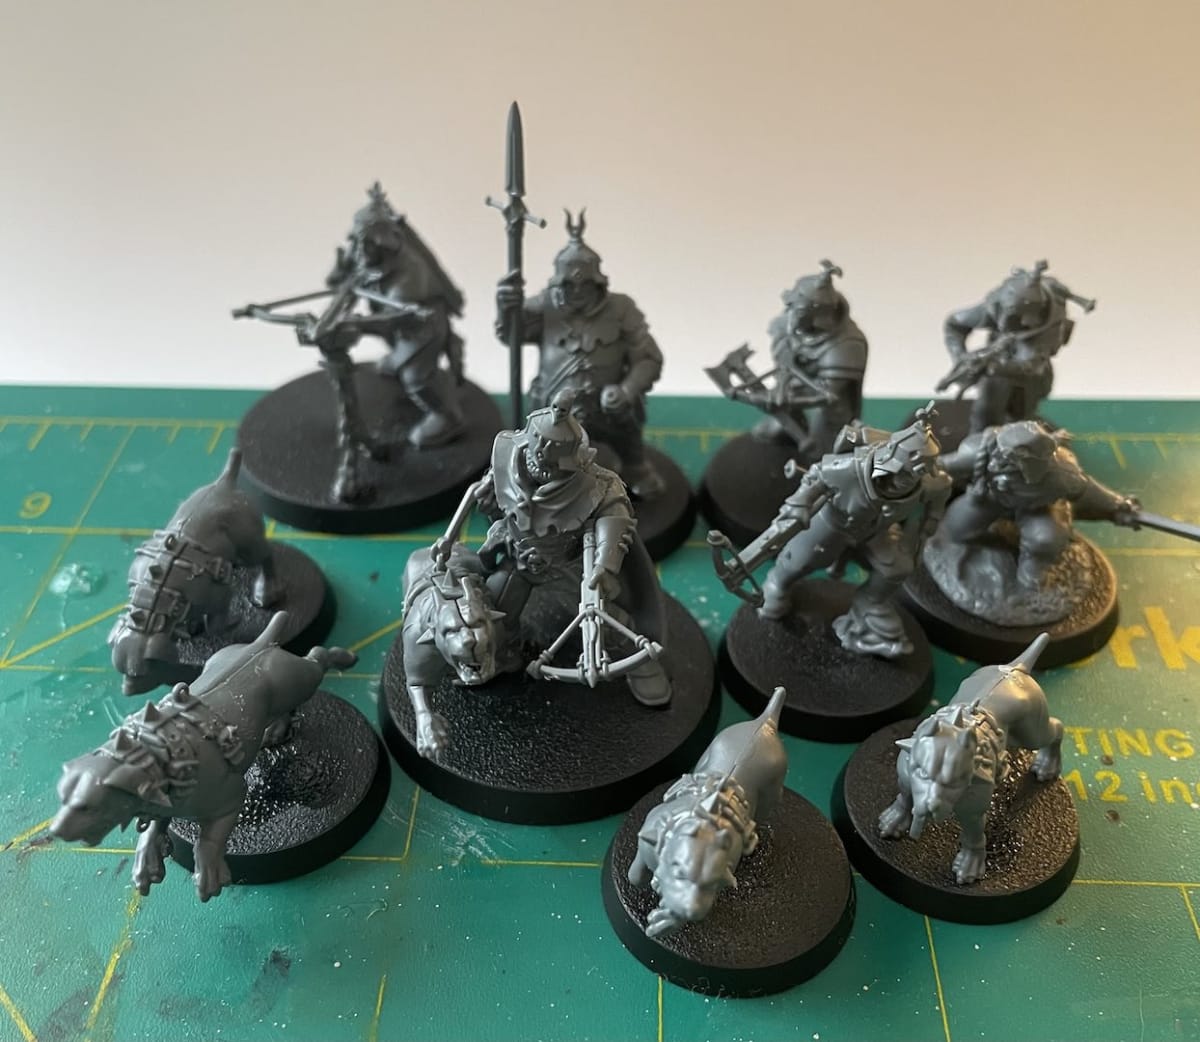 A group photo of the Warcry hunter and hunted miniatures